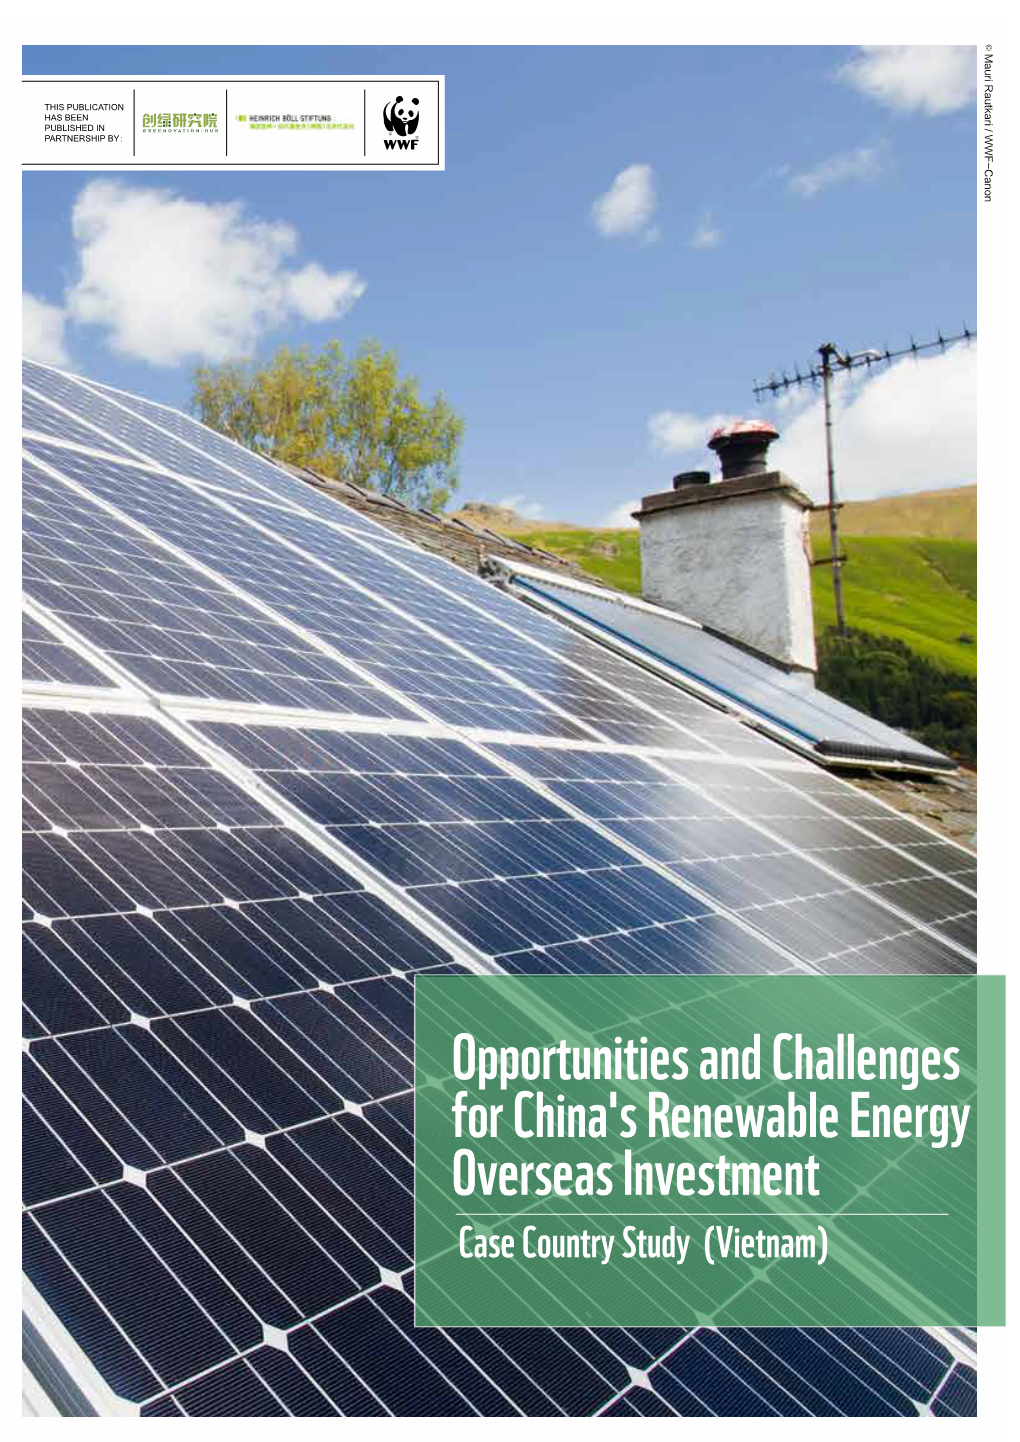 Opportunities and Challenges for China's Renewable Energy Overseas Investment Case Country Study (Vietnam)